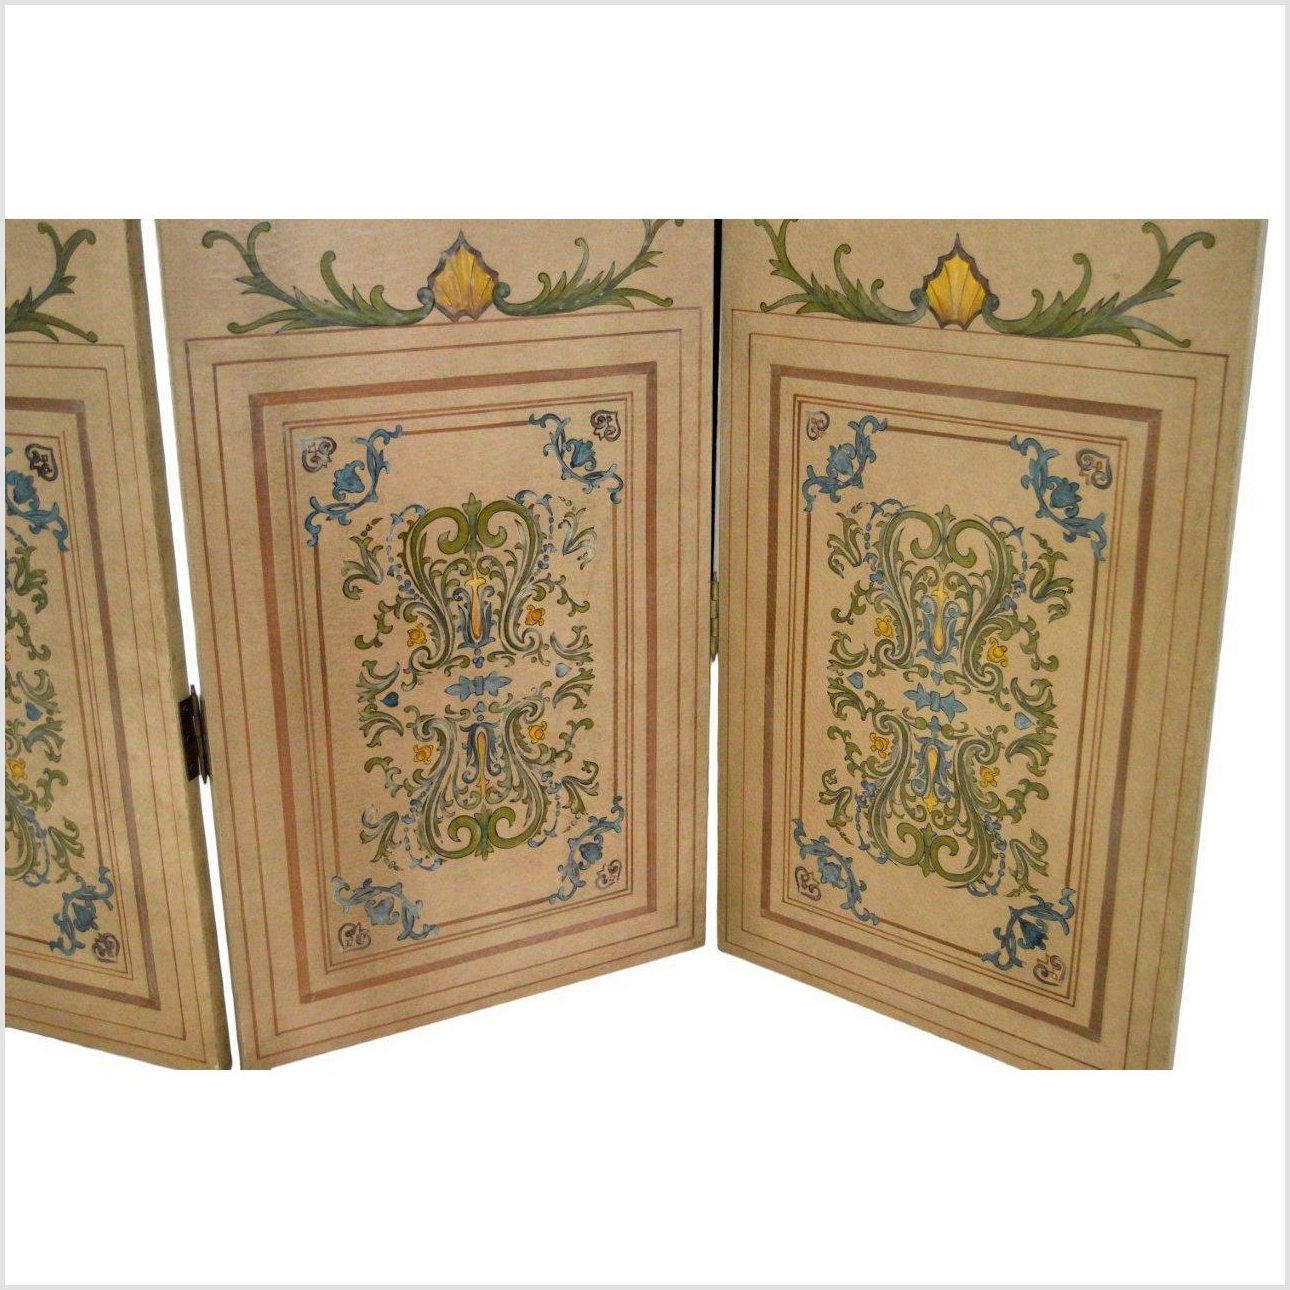 4-Panel Victorian Style Designed Screen-YN2836-7. Asian & Chinese Furniture, Art, Antiques, Vintage Home Décor for sale at FEA Home